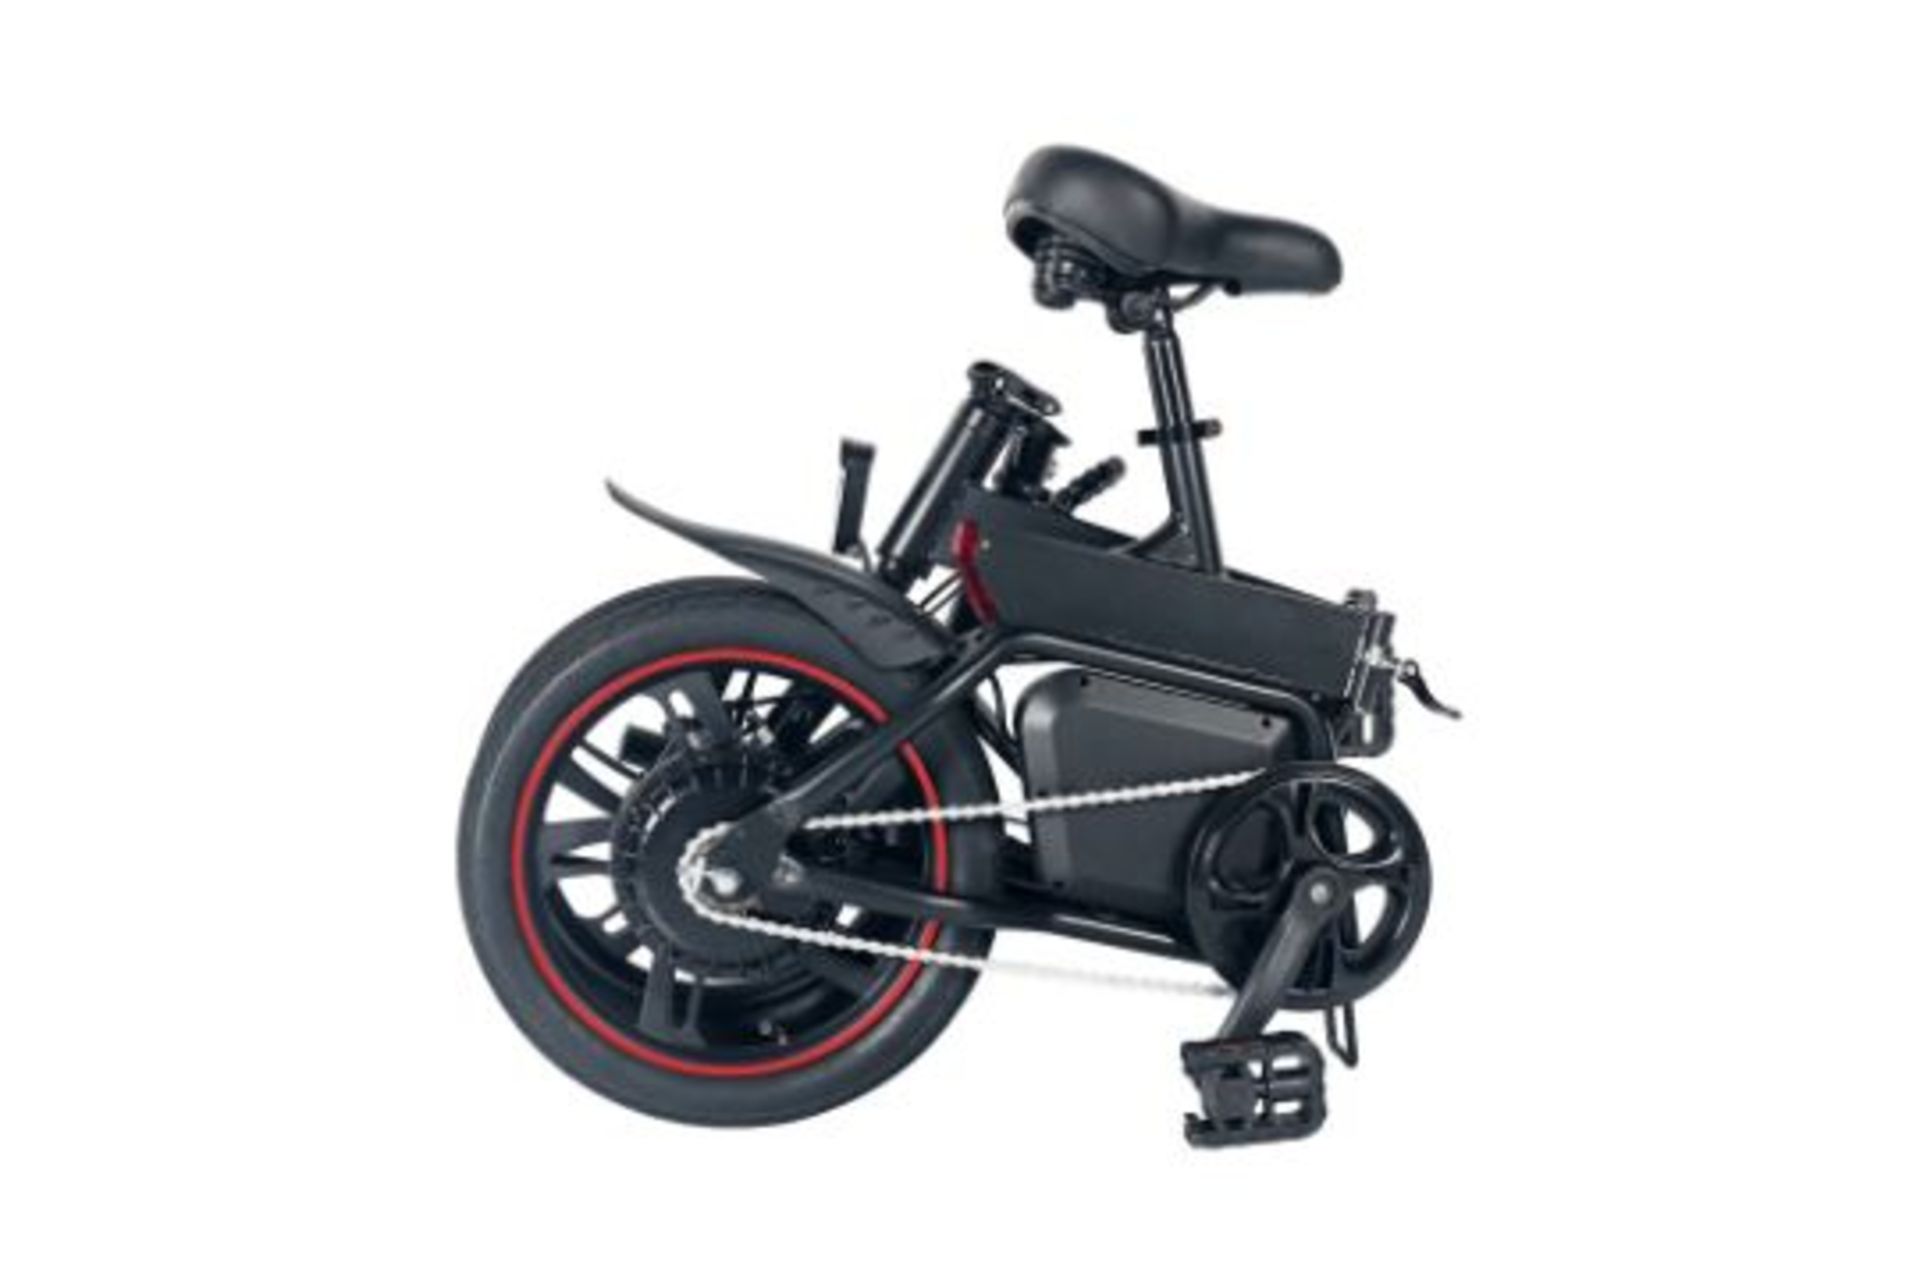 Windgoo B20 Pro Electric Bike. RRP £1,100.99. With 16-inch-wide tires and a frame of - Image 2 of 3